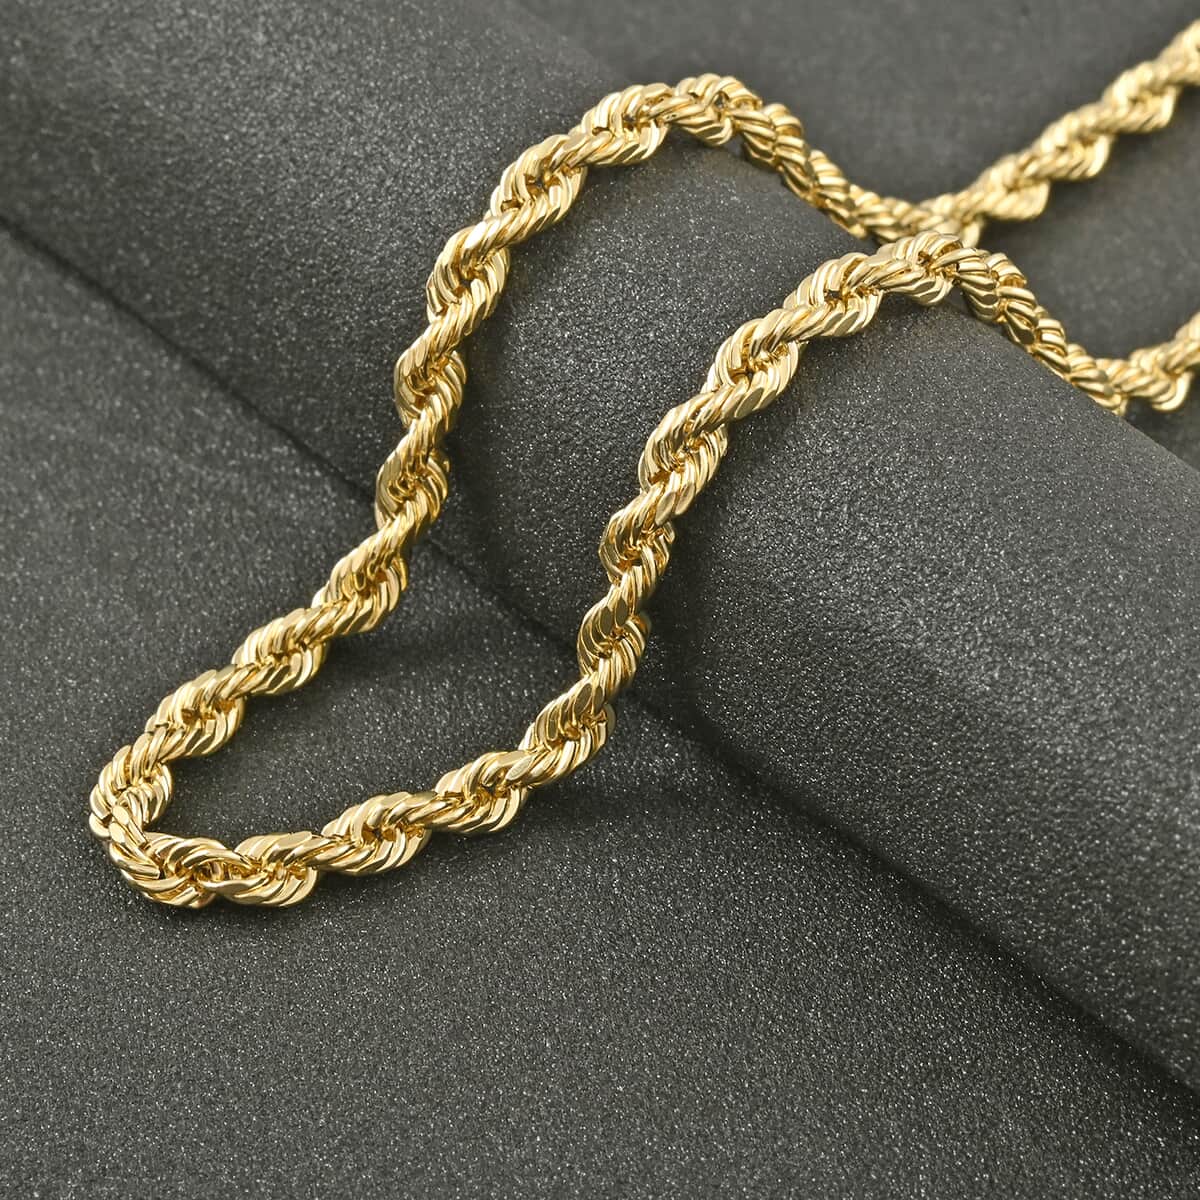 14K Gold 2.5mm Rope Chain, 18 Long, 9.6 Grams